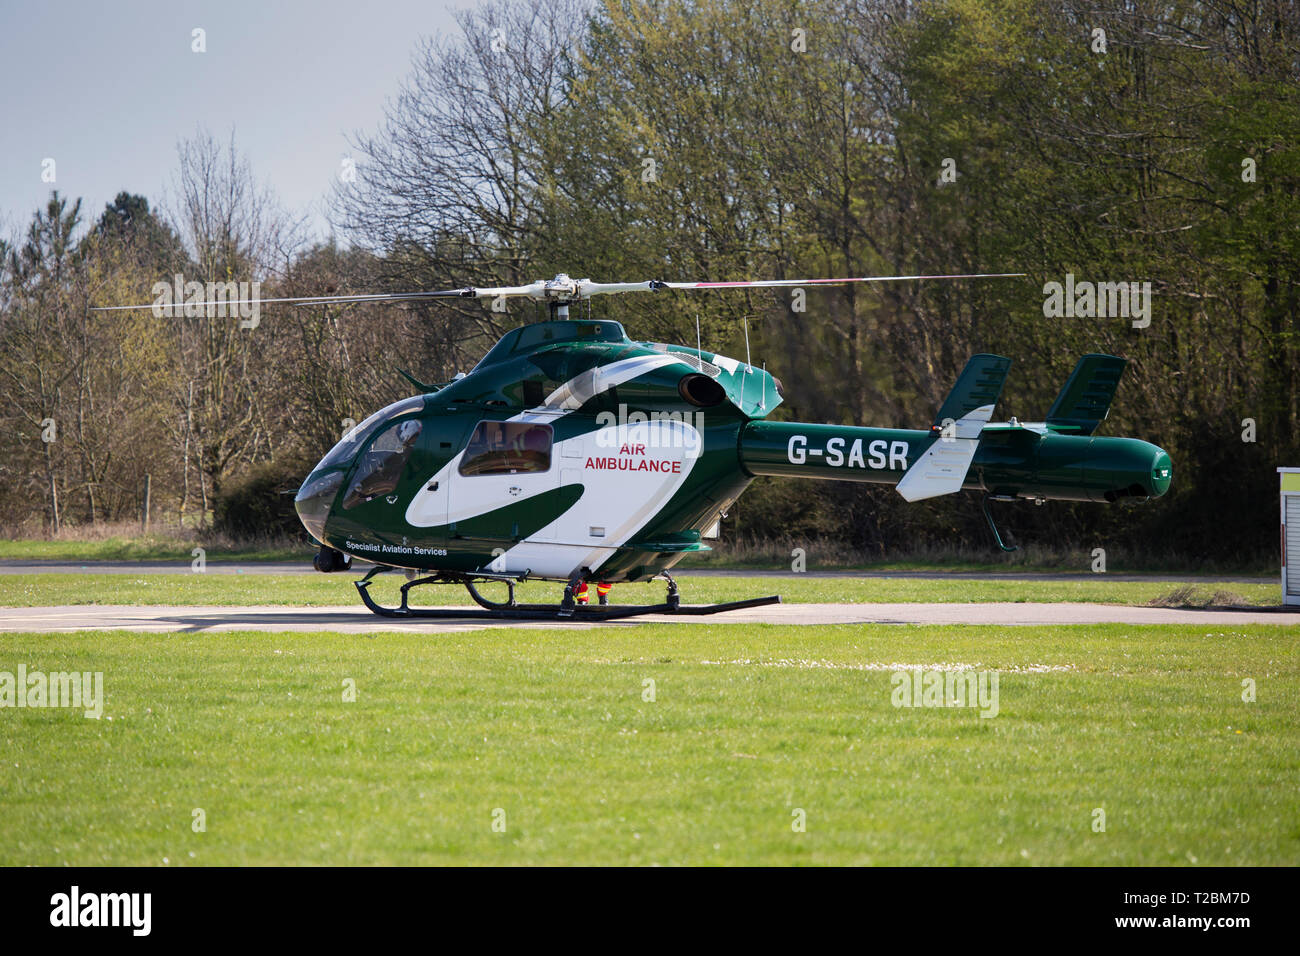 Helicopter Operating for Essex & Herts Air Ambulance Taking off from Earls Colne Aerodrome in Essex on a Fine Spring Day Stock Photo